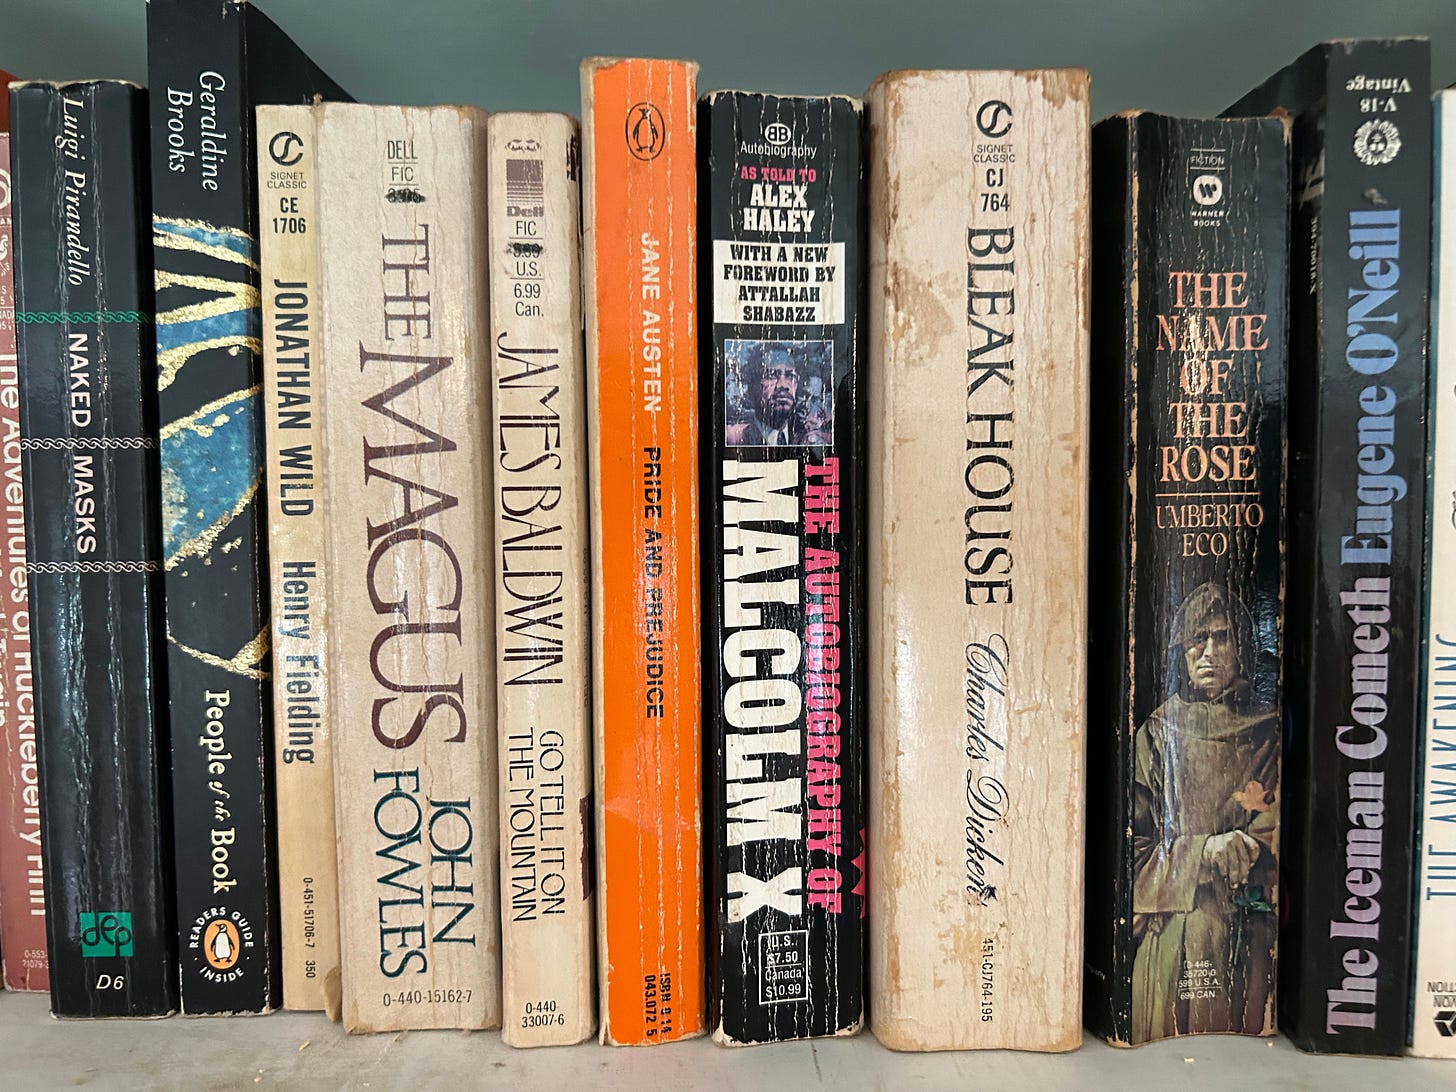 Approximately ten copies of well-worn paperback books on a book shelf, in the middle of which is The Autobiography of Malcolm X, flanked by Bleak House by Charles Dickens and Pride and Prejudice by Jane Austen. 